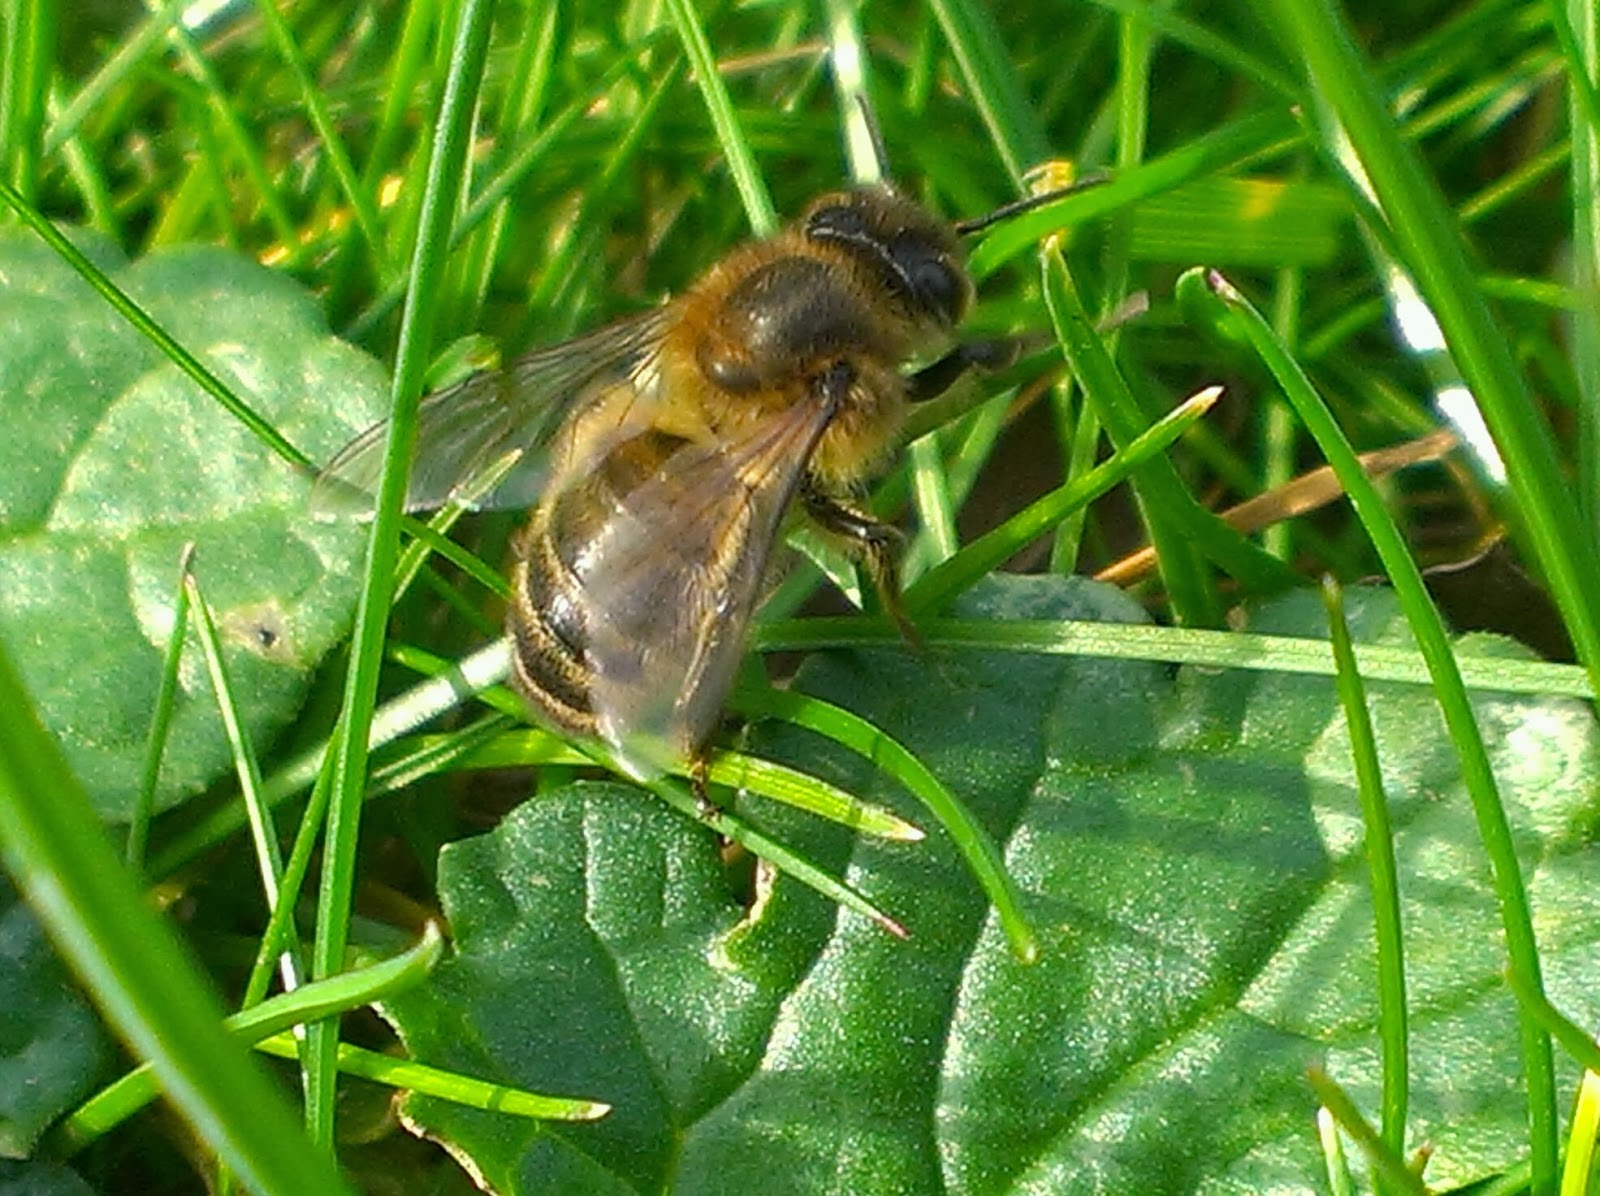 Bees collecting water from the dew on the grass